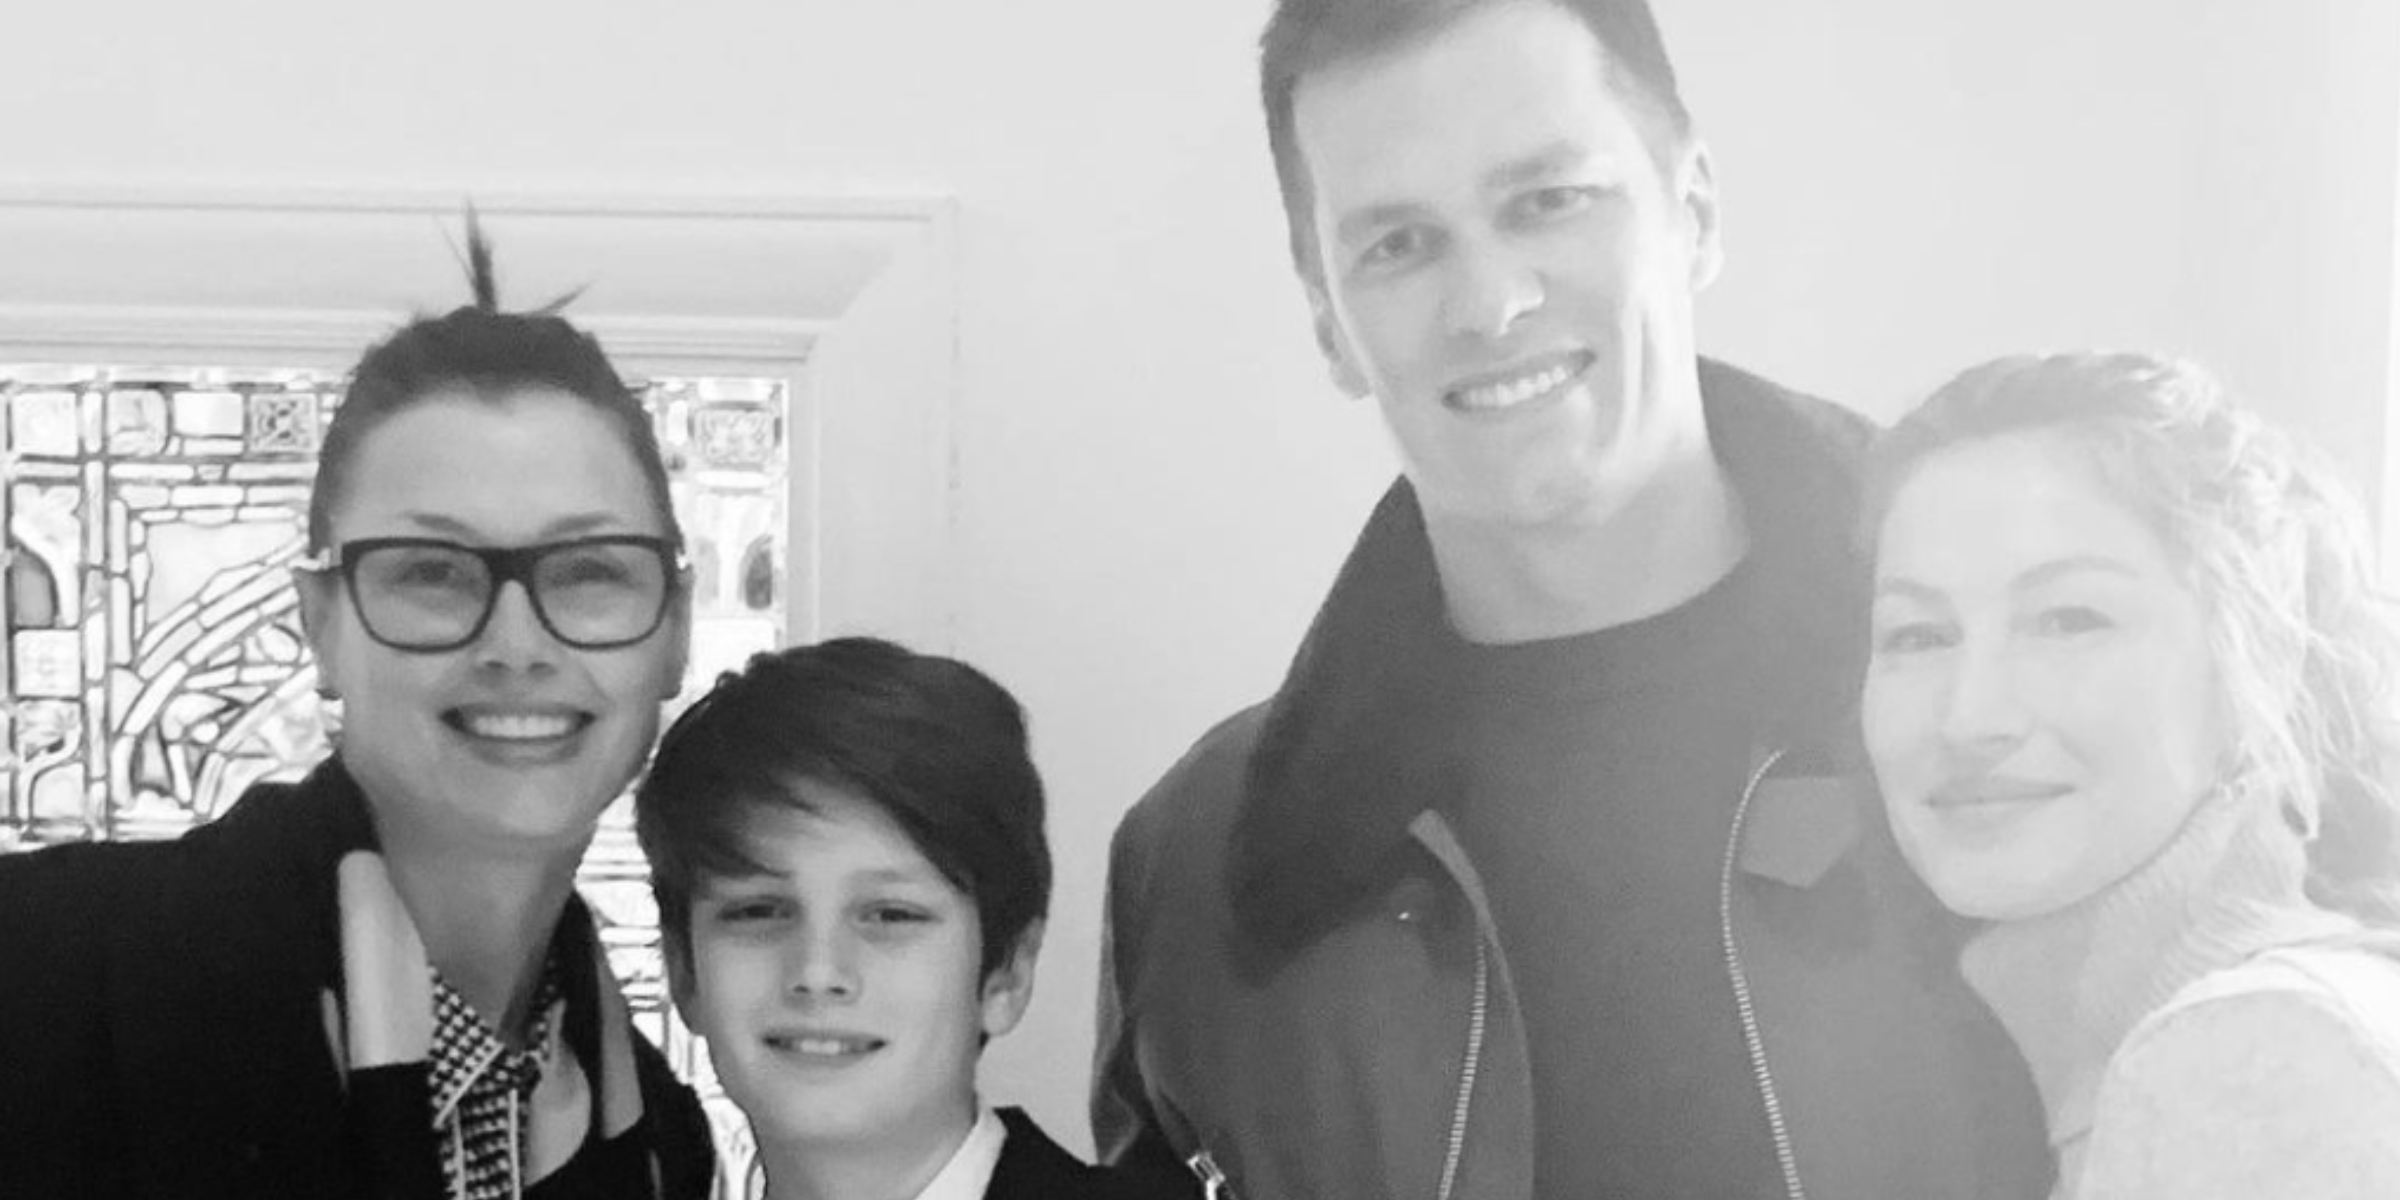 Bridget Moynahan and Tom Brady with their son and Gisele Bündchen | Source: Instagram.com/tombrady/